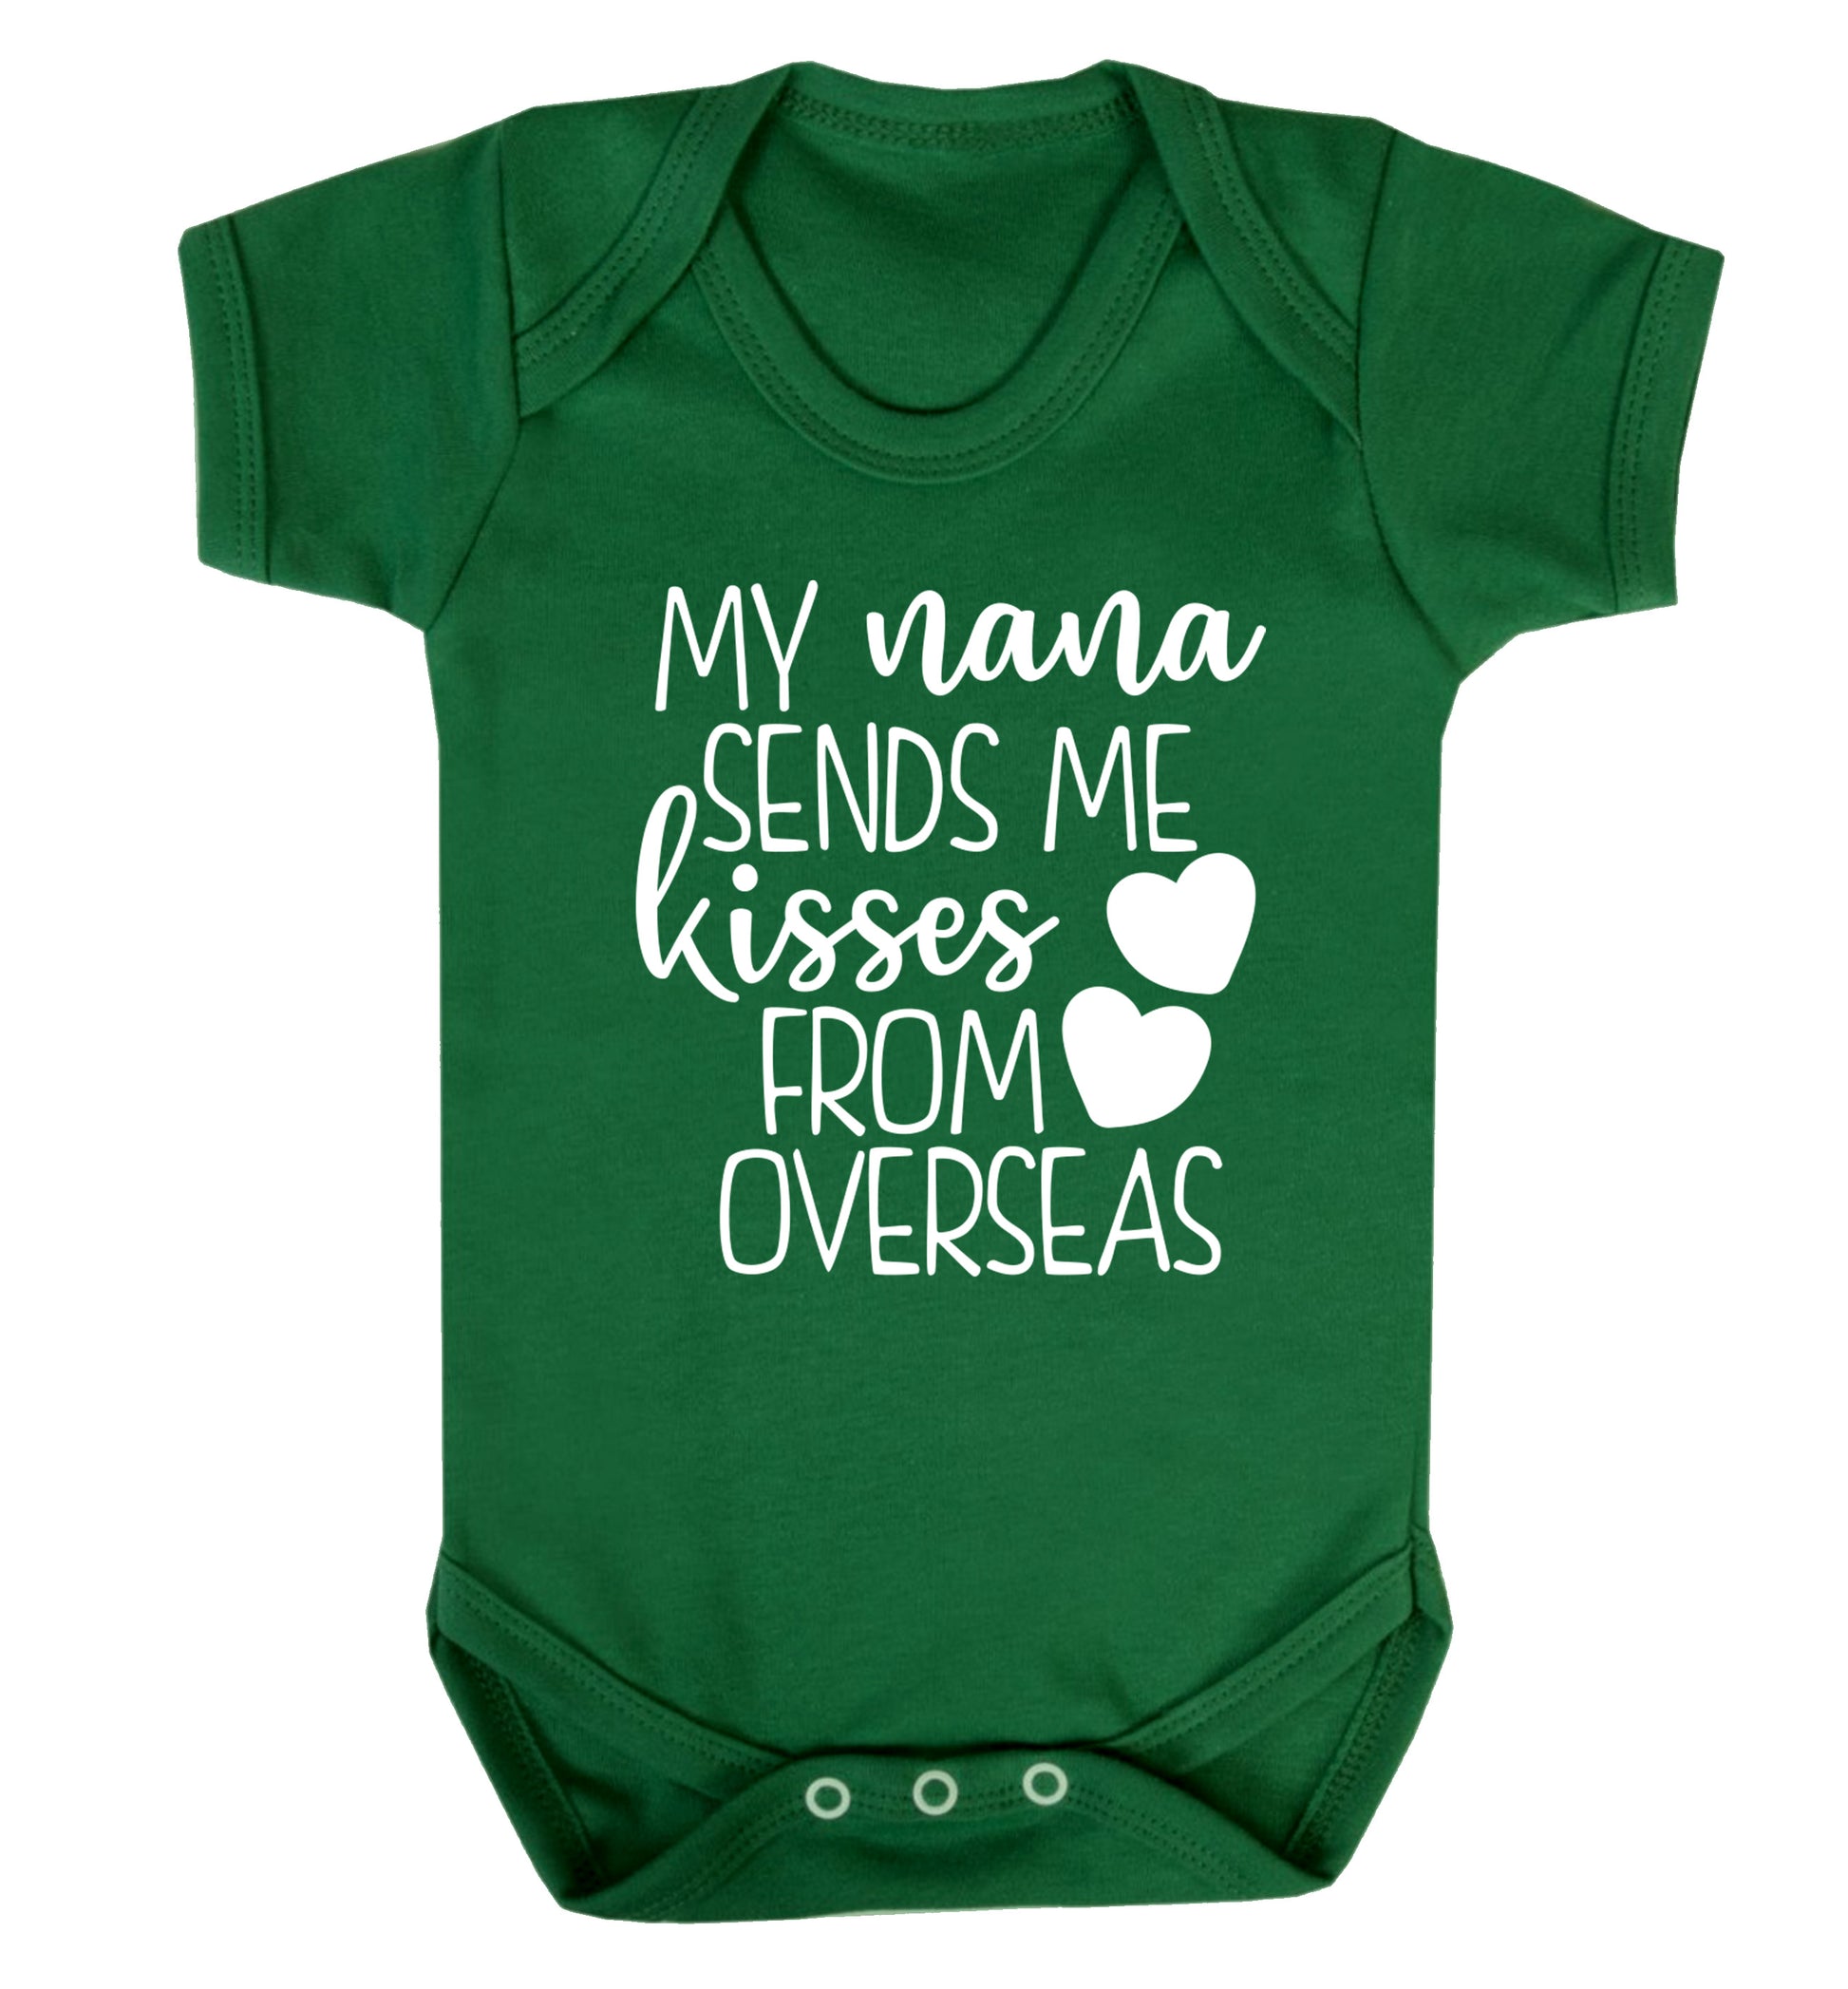 My nana sends me kisses from overseas Baby Vest green 18-24 months